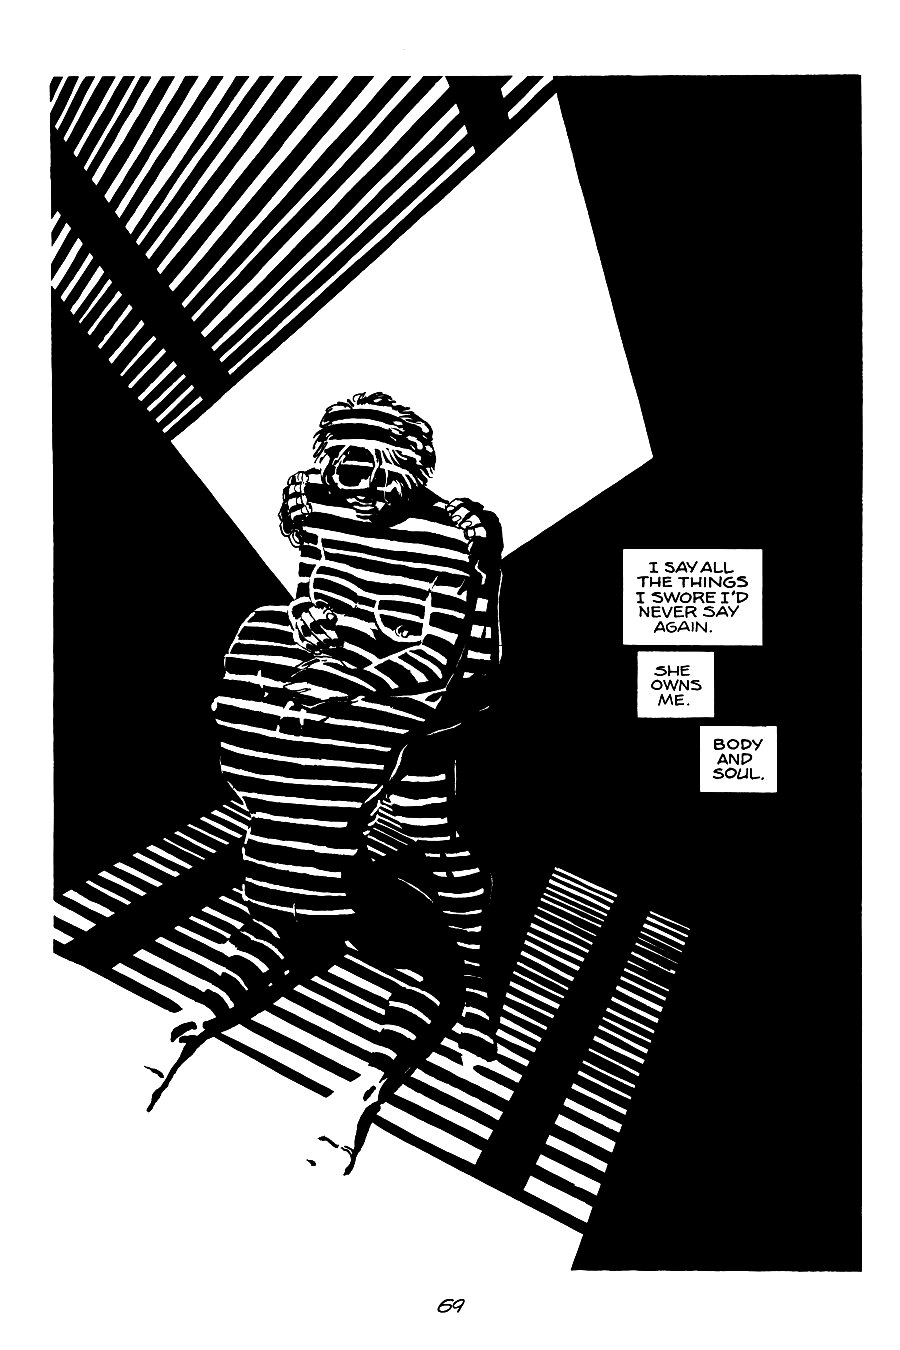 page 69 of sin city 2 the hard goodbye